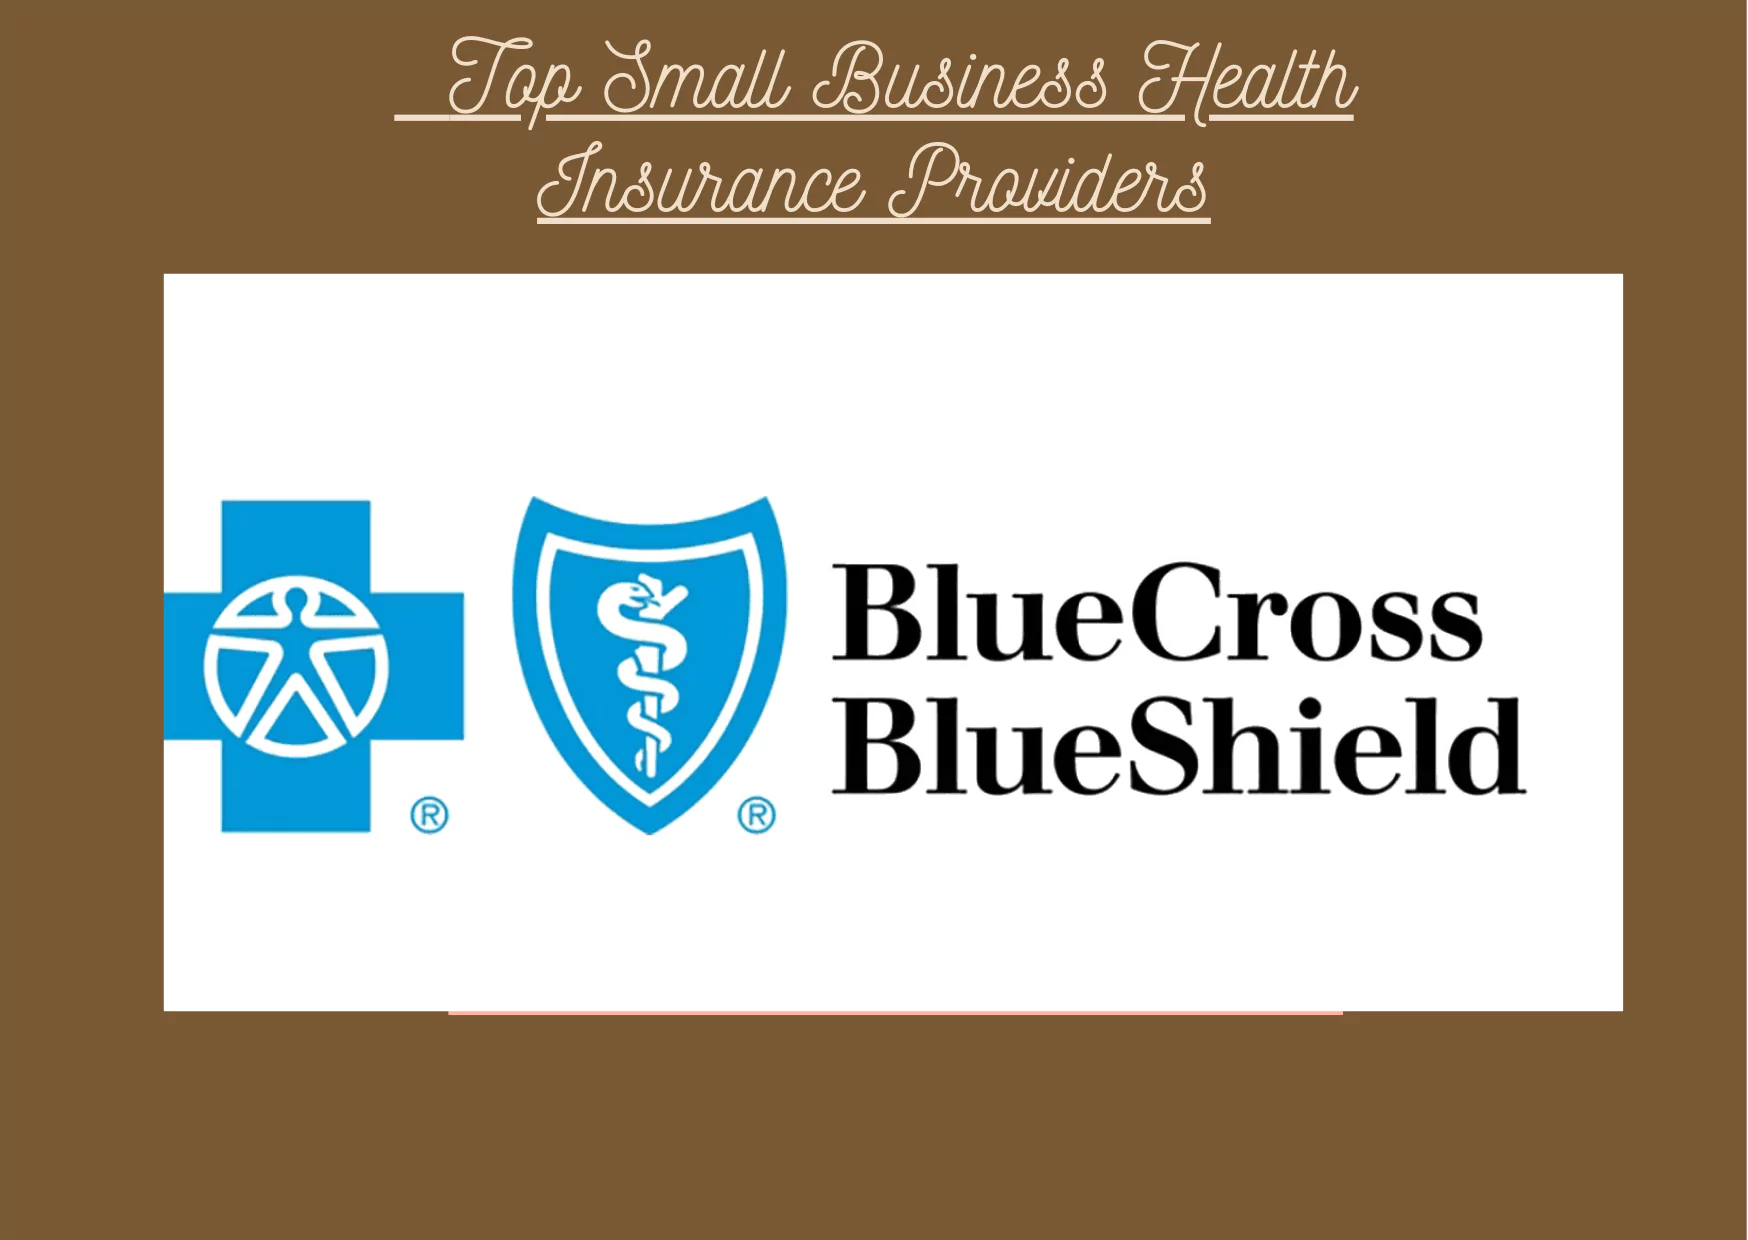 Top Small Business Health Insurance Providers